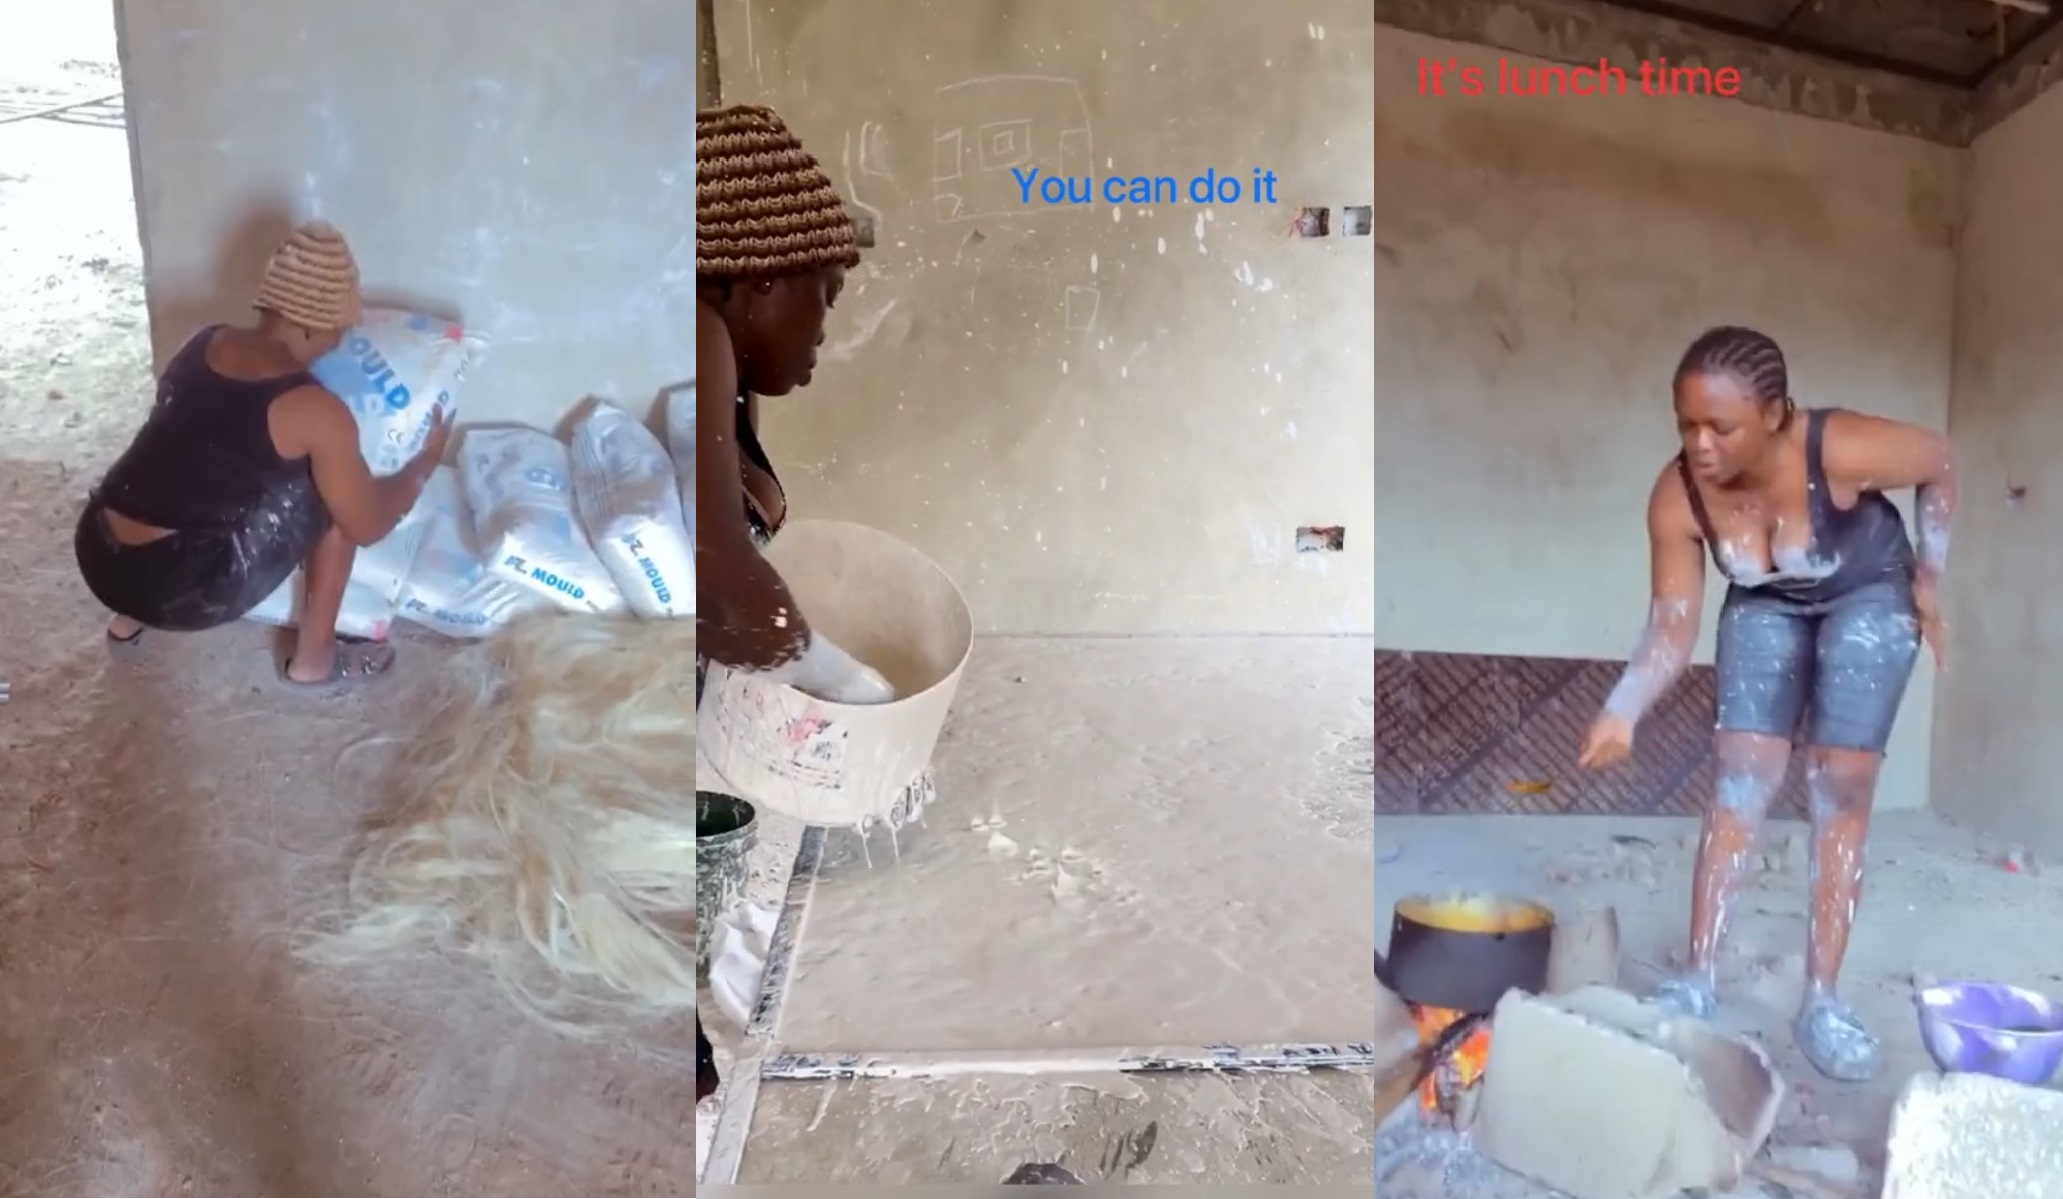 A Beautiful Lady Working At a Construction Site Who Also Prepares Jollof Rice For Her Colleagues To Eat Goes Viral Online [VIDEO].